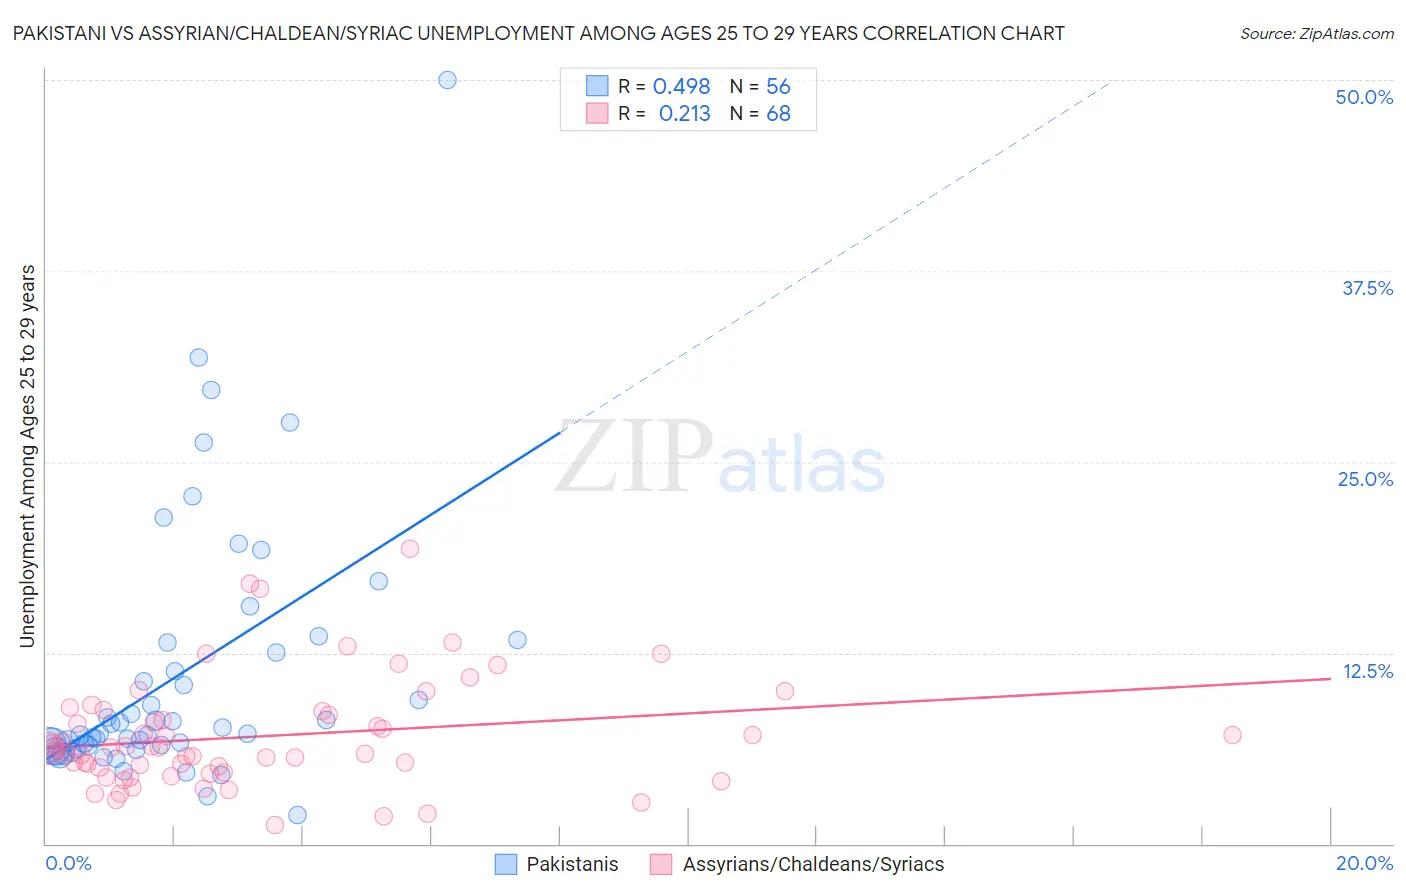 Pakistani vs Assyrian/Chaldean/Syriac Unemployment Among Ages 25 to 29 years